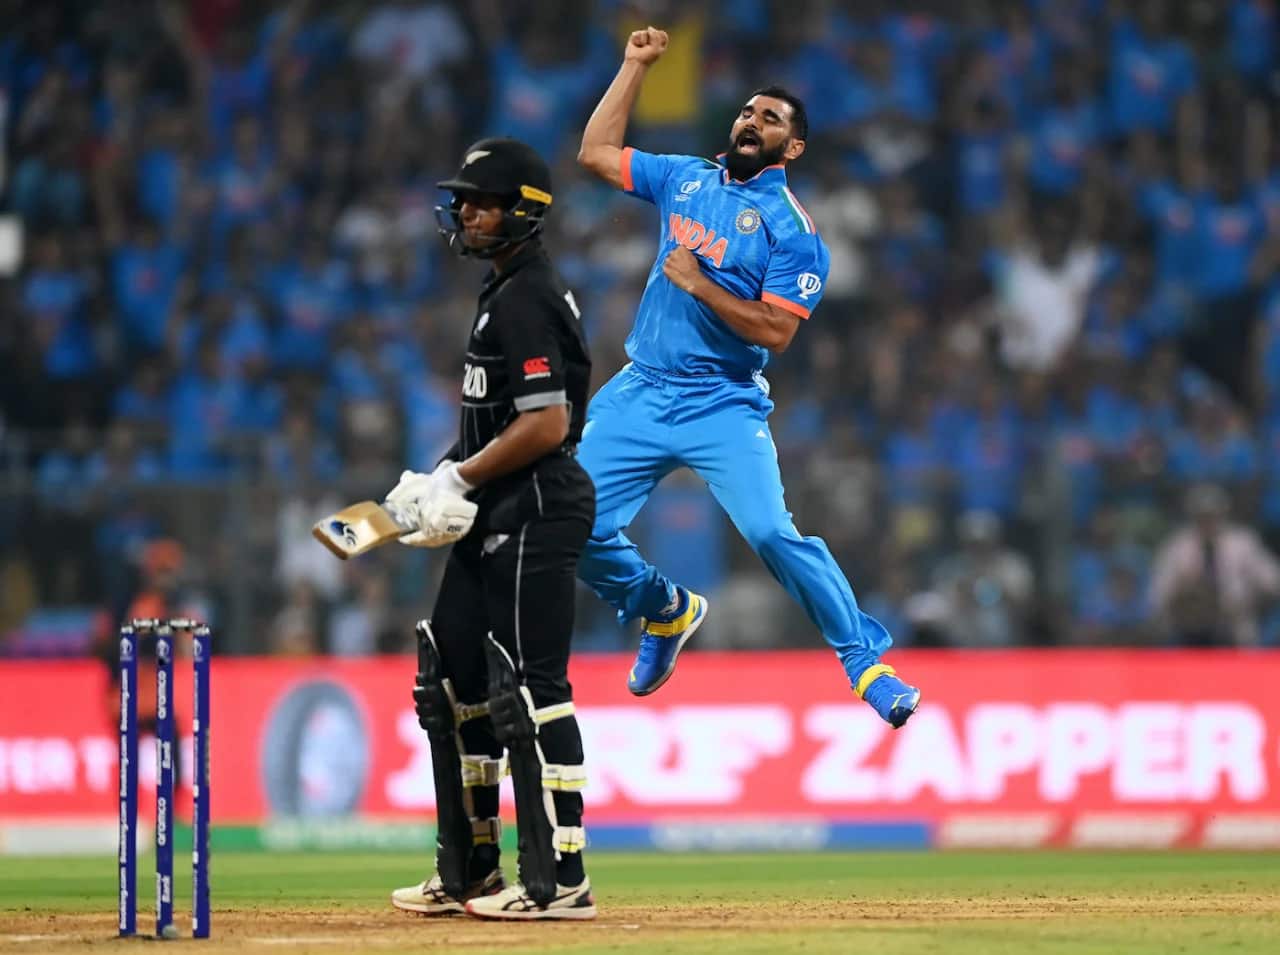 ‘Only One Thing In Mind’ - Mohammed Shami After Taking IND To World Cup 2023 Final